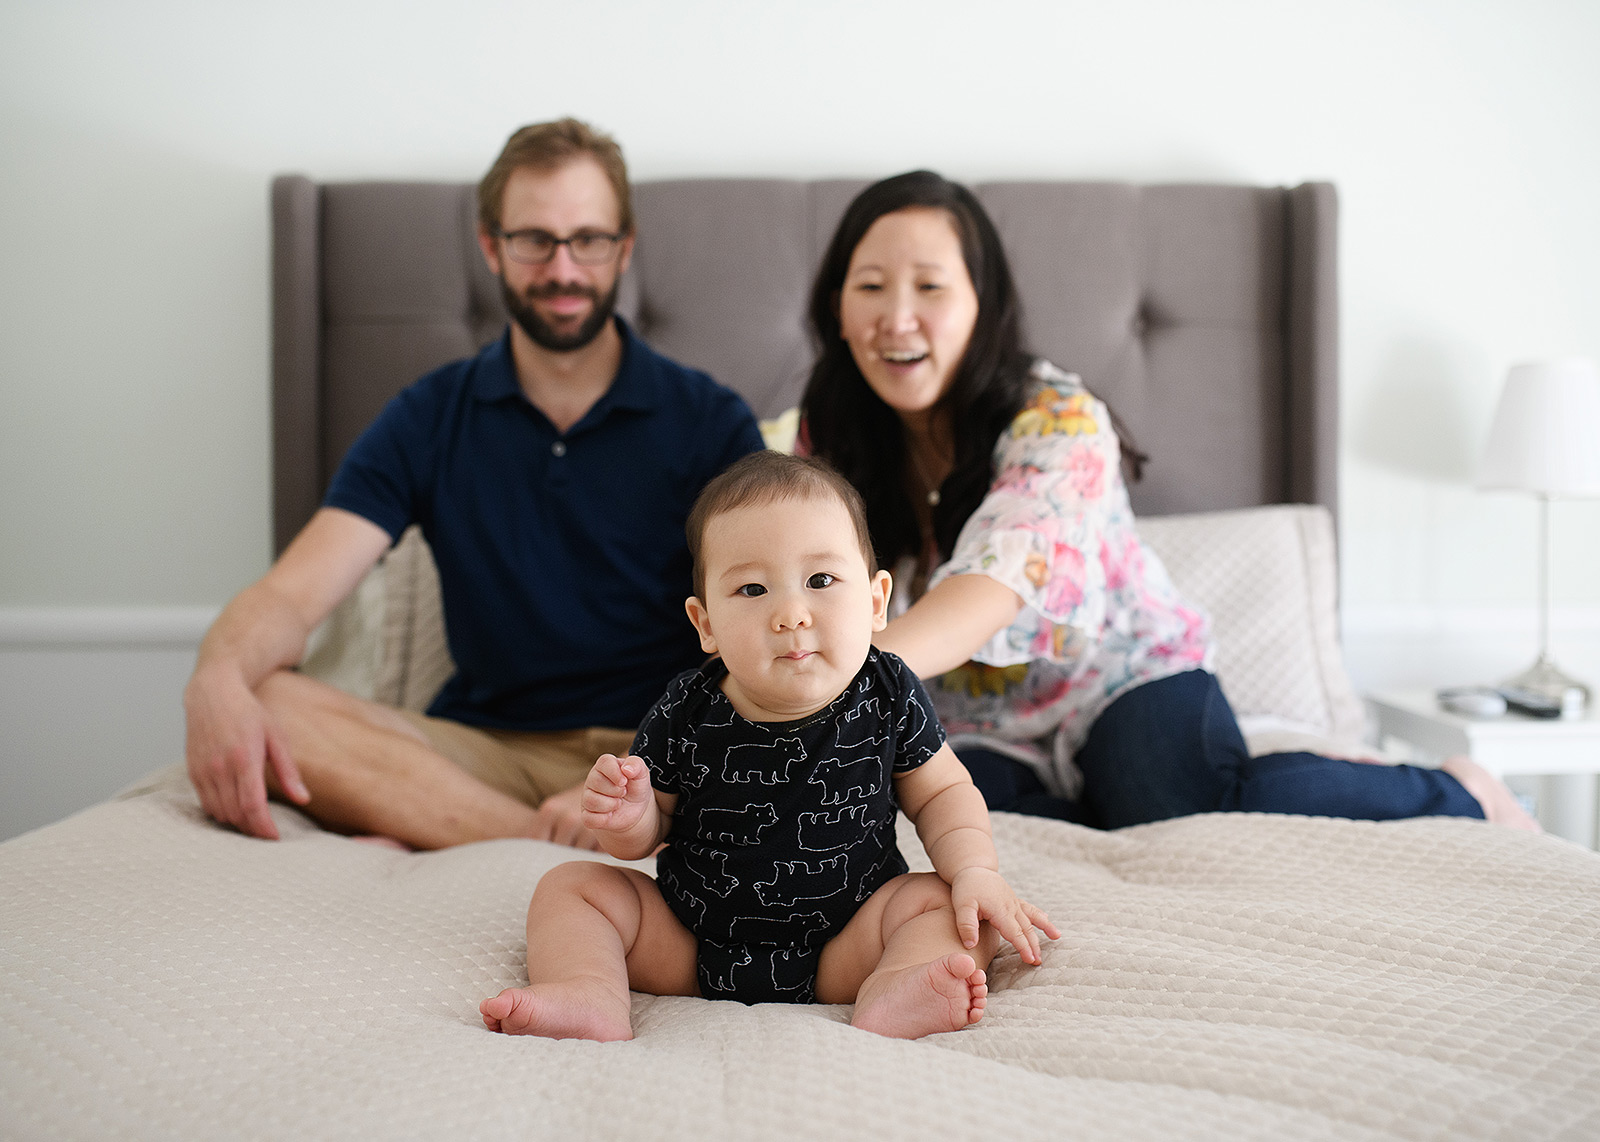 Lifestyle session in home on bed with 6 month baby boy in foreground and parents in background